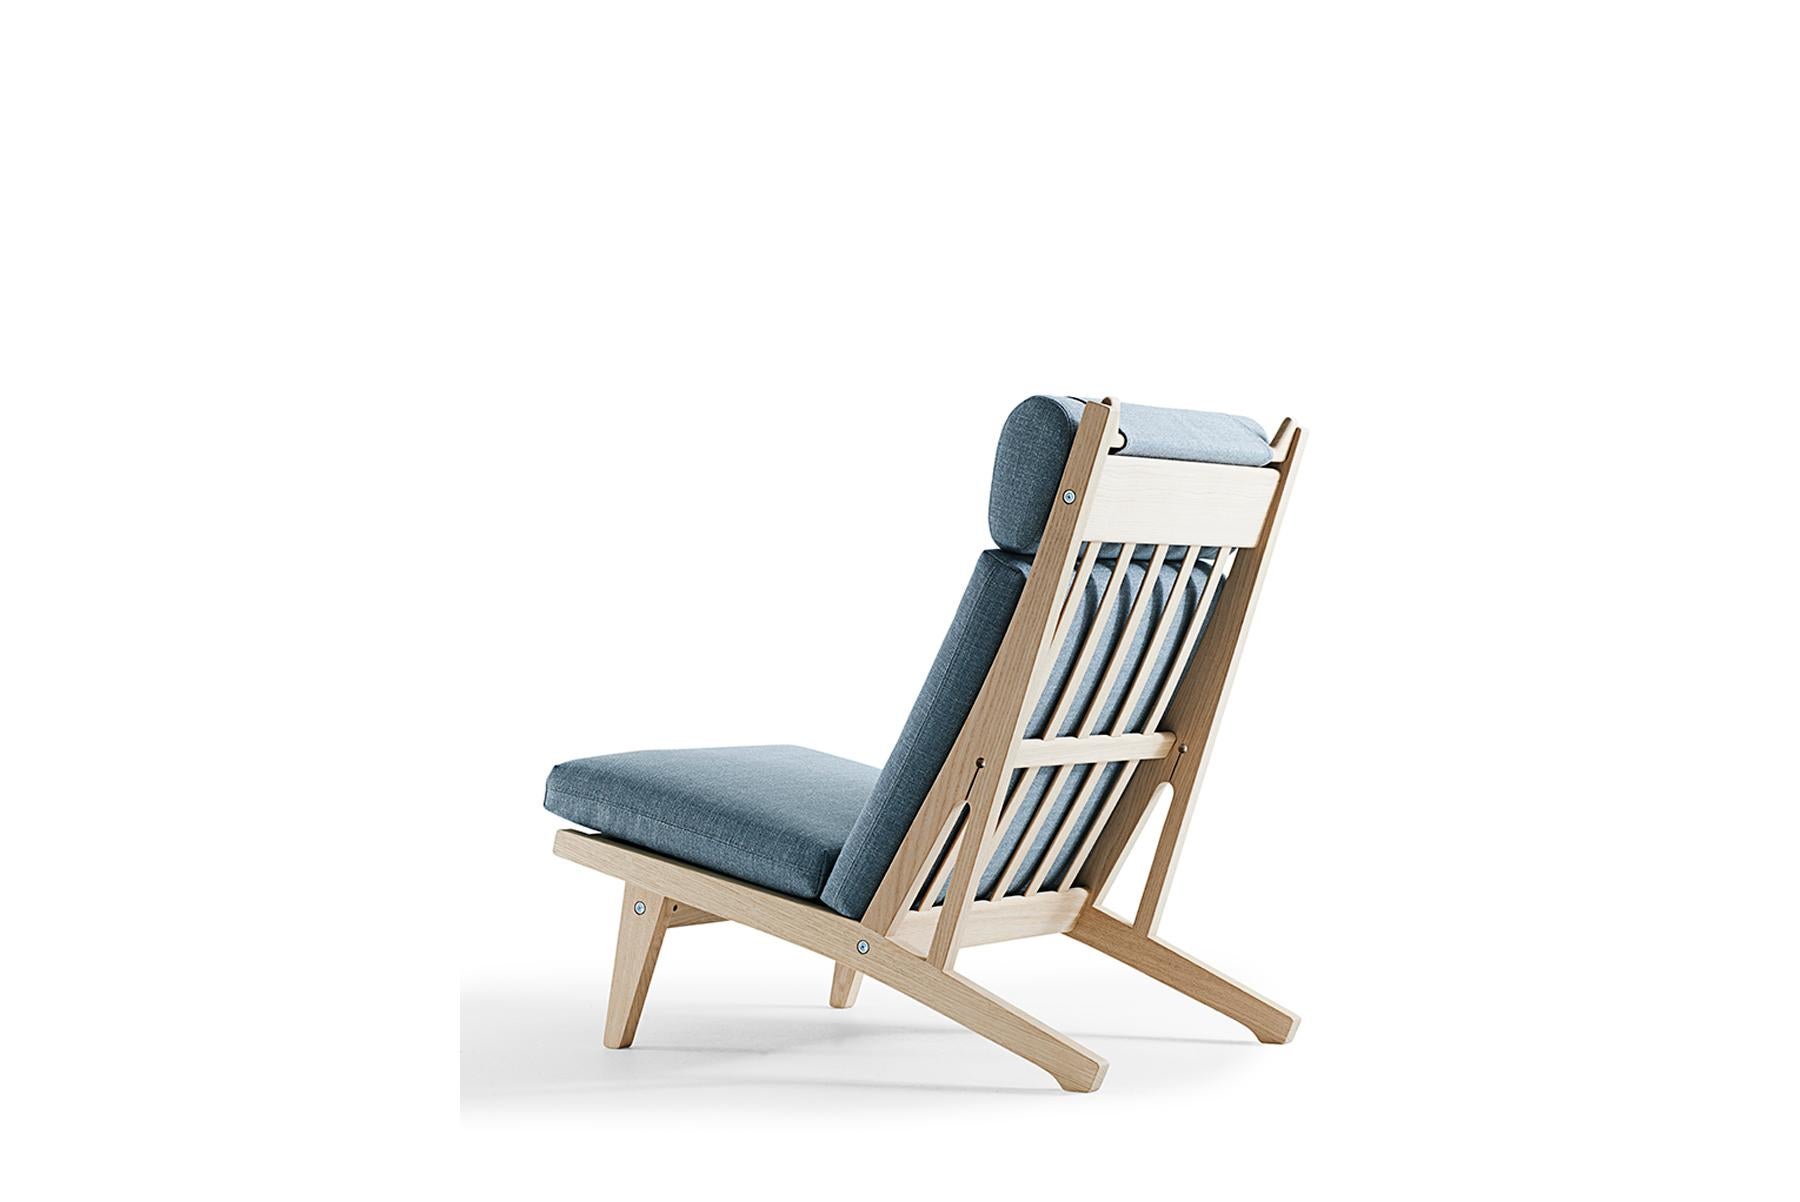 Designed in 1969 by Hans Wegner, the 375A lounge chair pairs clean lines with remarkable craftsmanship. The chair is handcrafted at GETAMA’s factory in Gedsted, Denmark by skilled cabinetmakers using traditional Scandinavian techniques.

Available